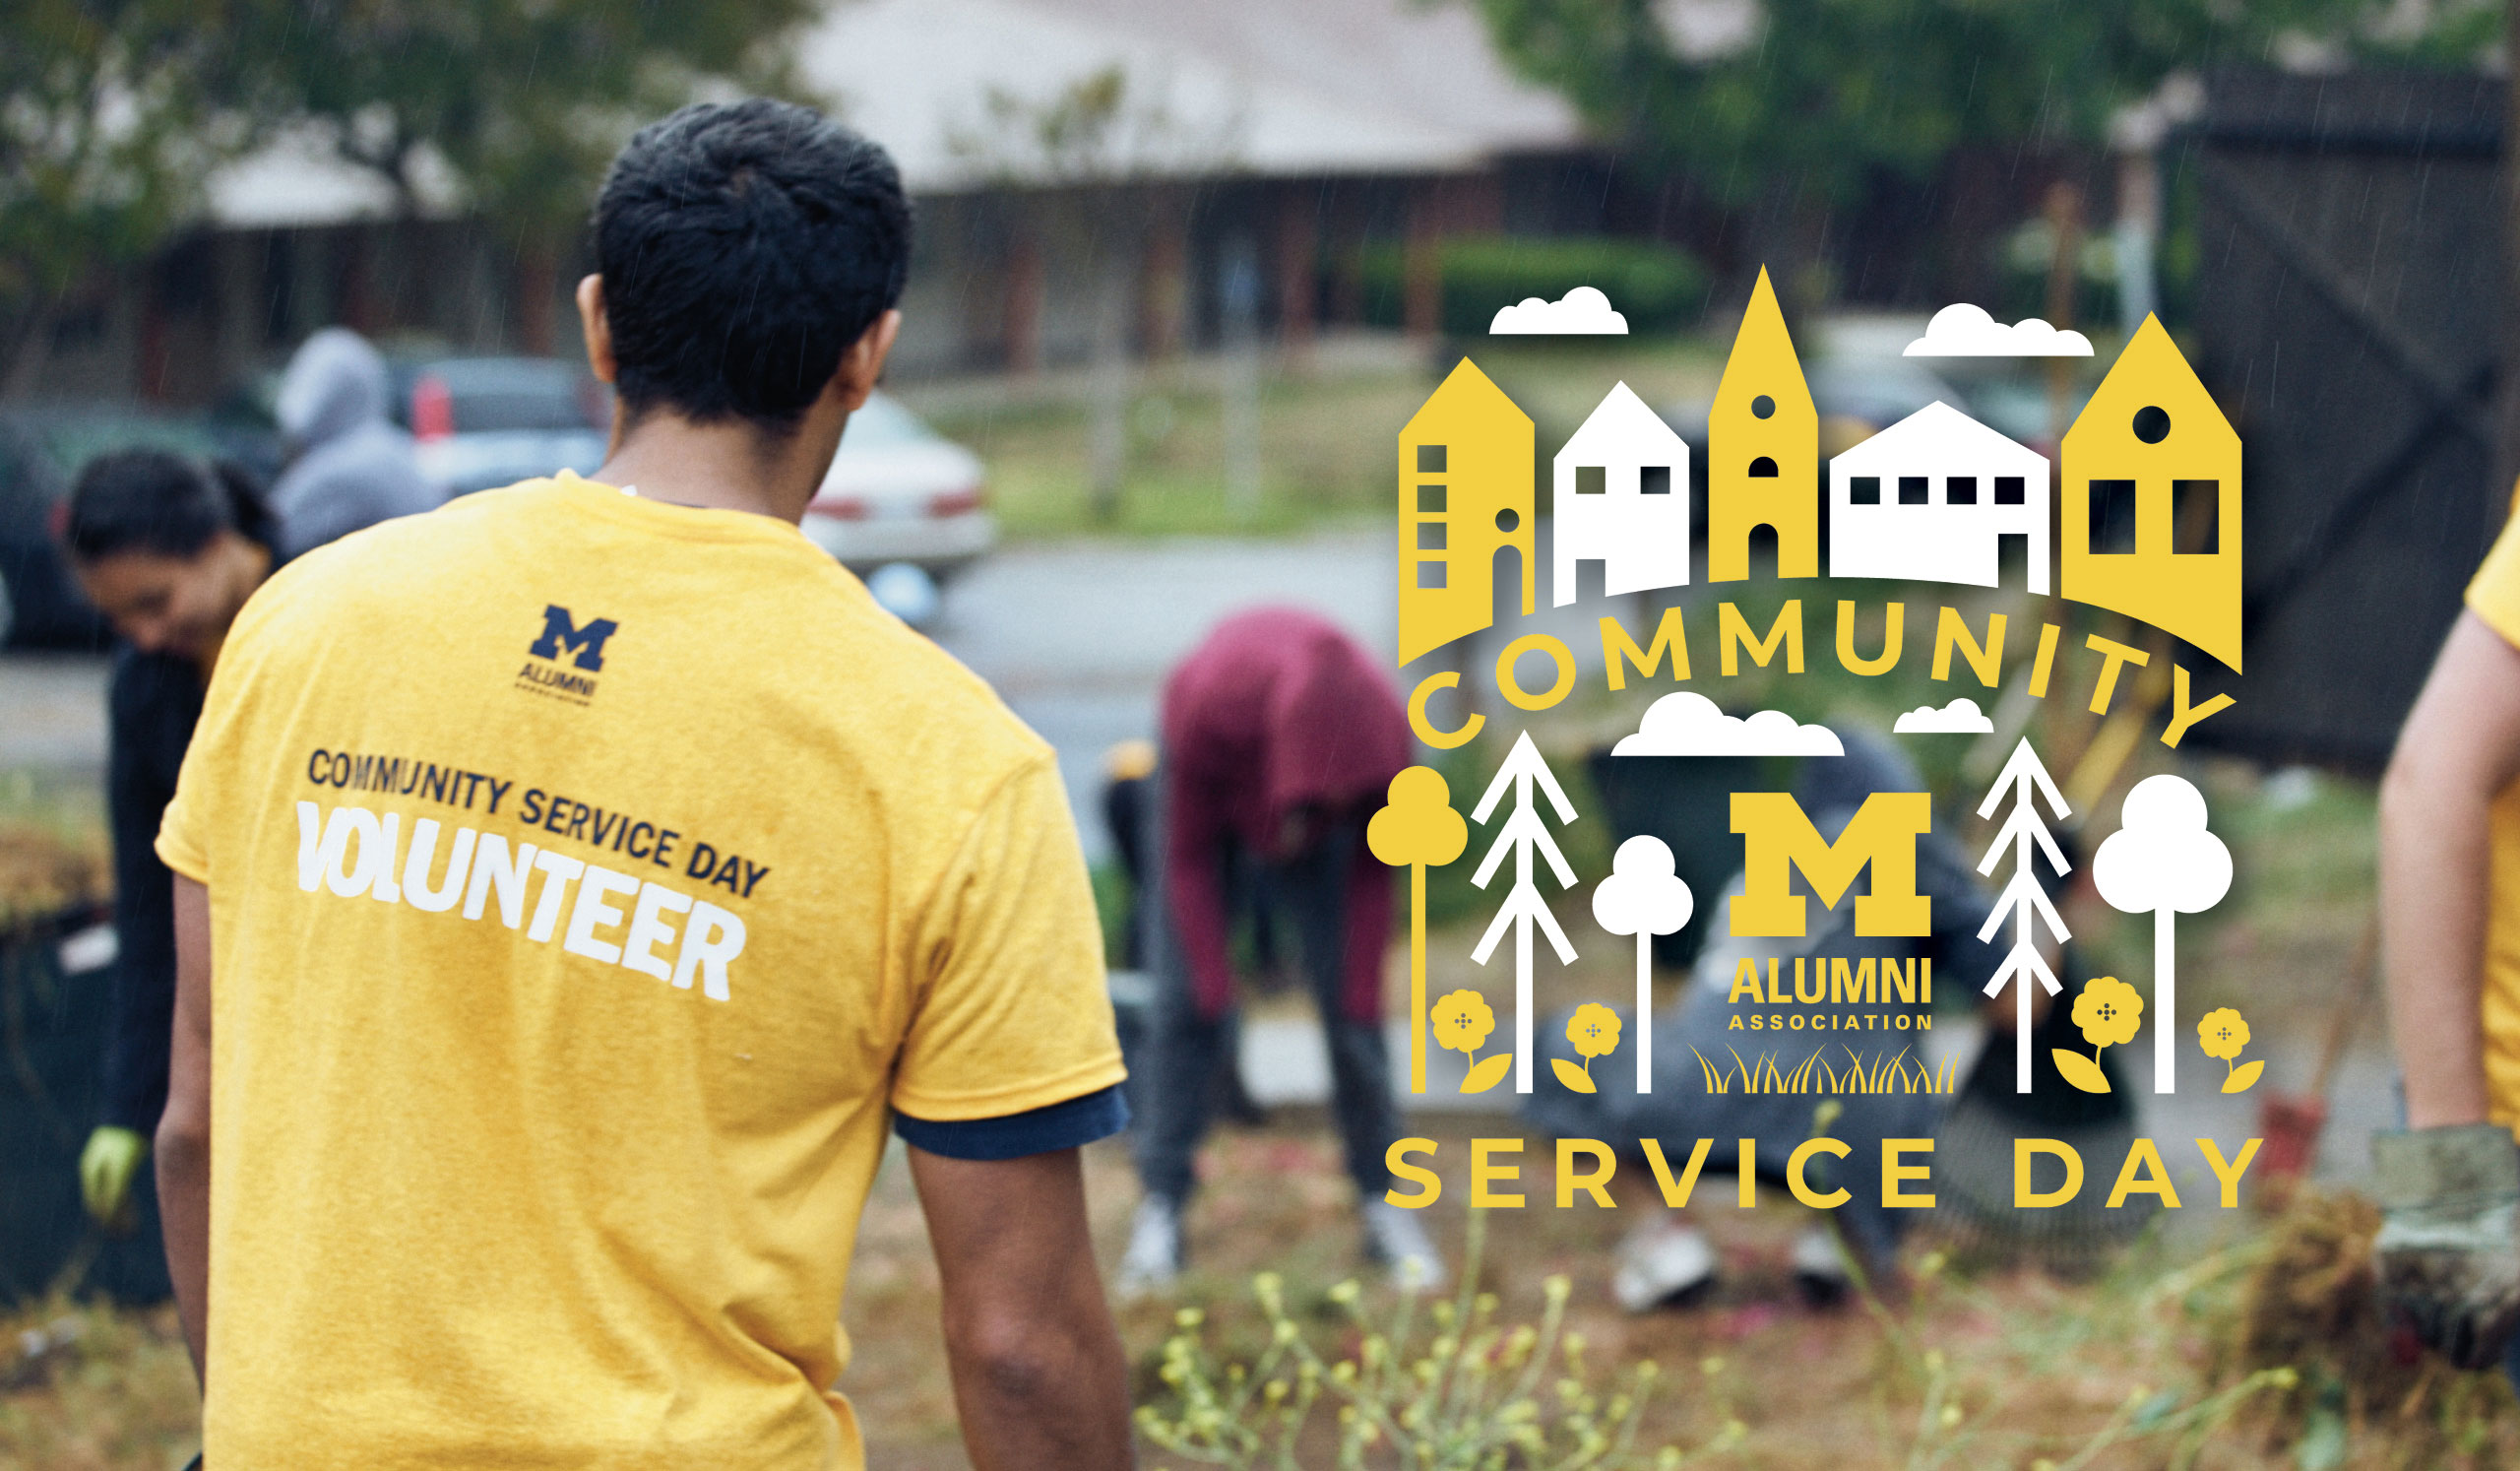 Community Service Day at the Alumni Association